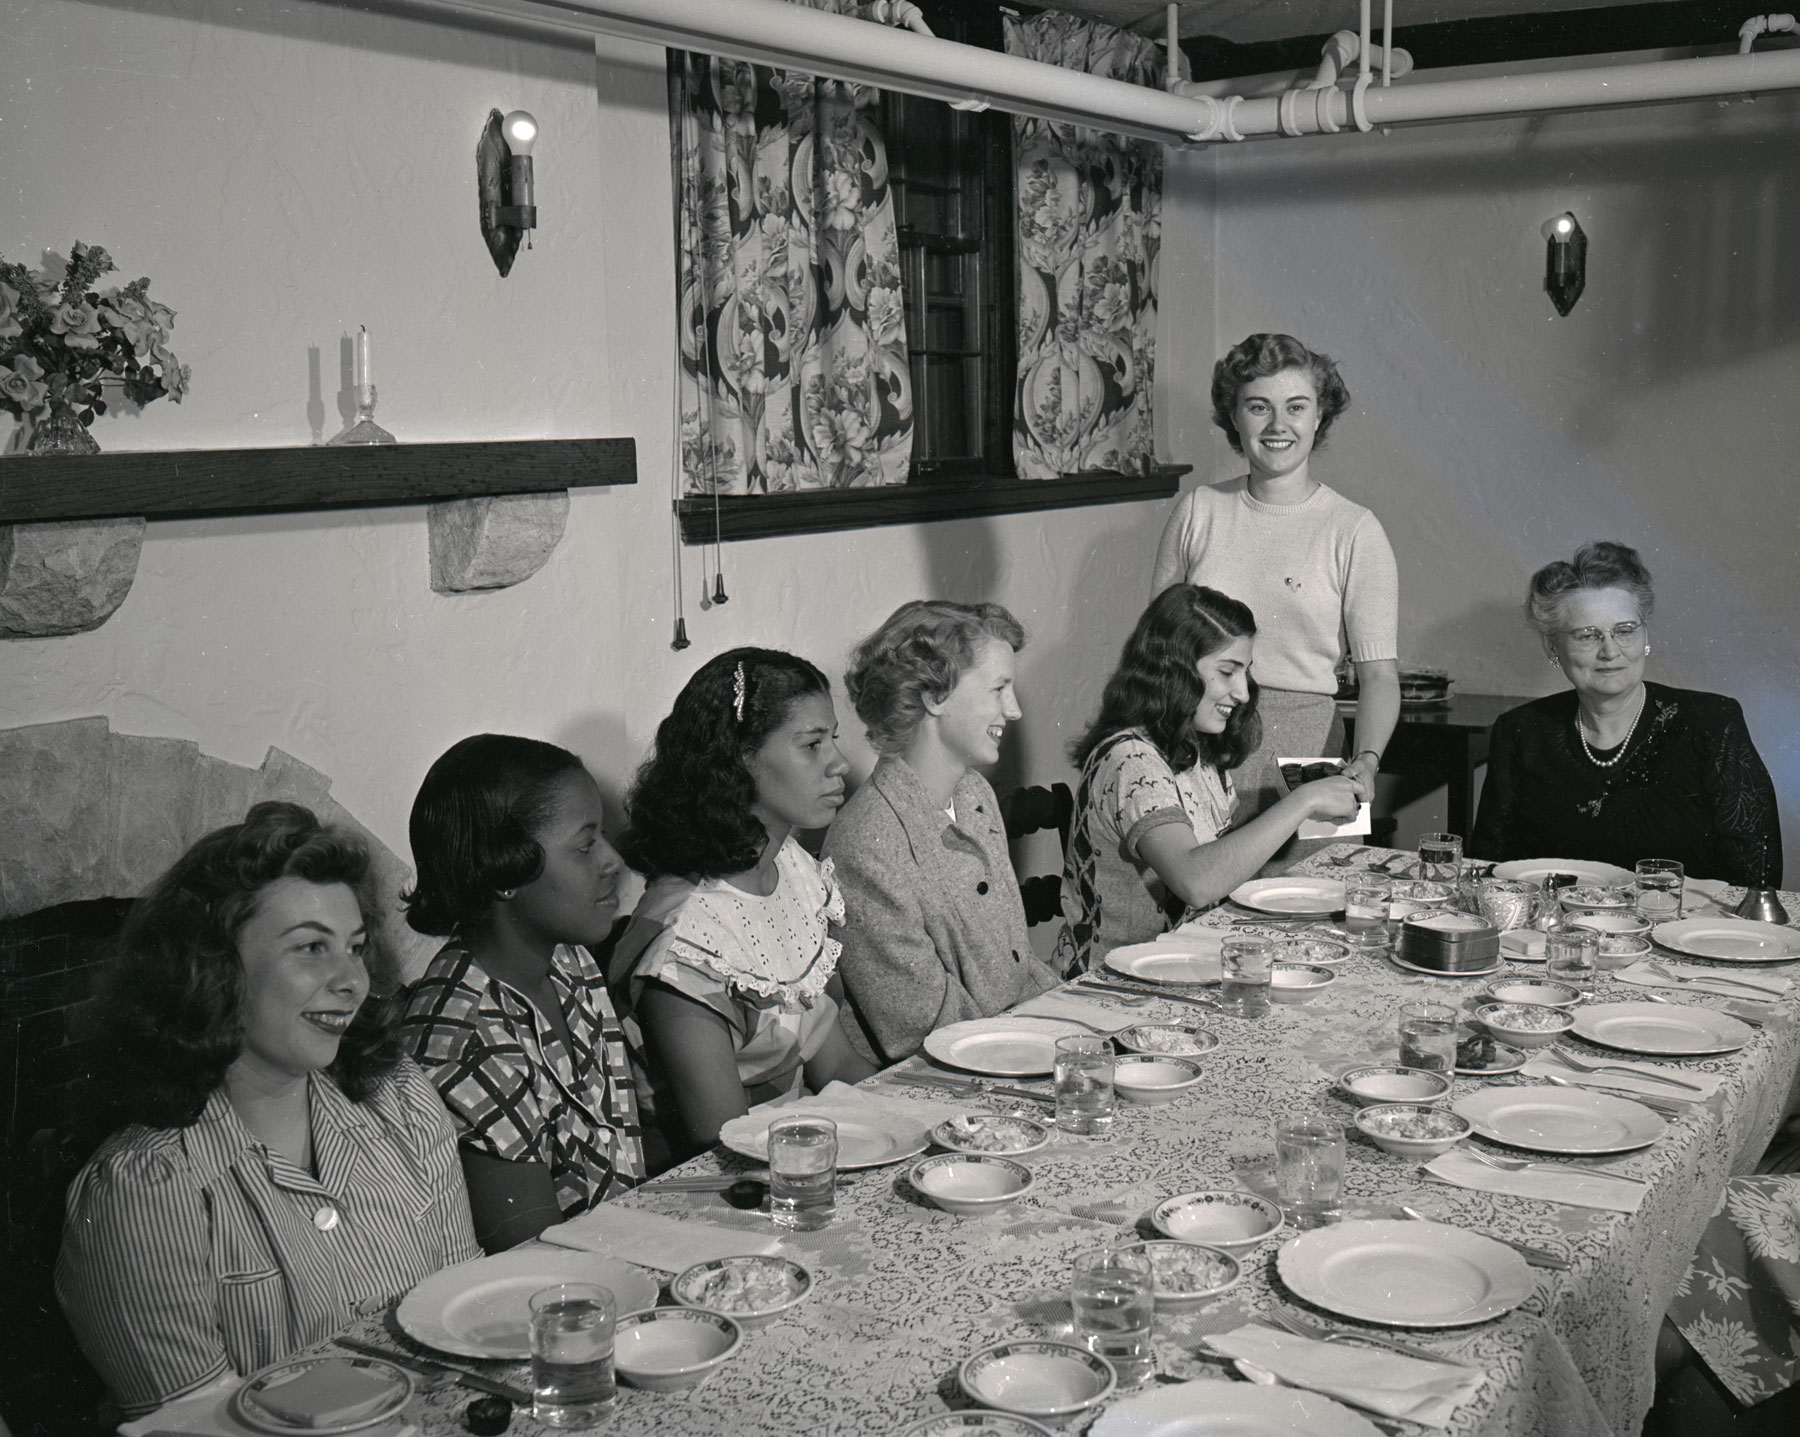 A black and white photograph of women around a dining table